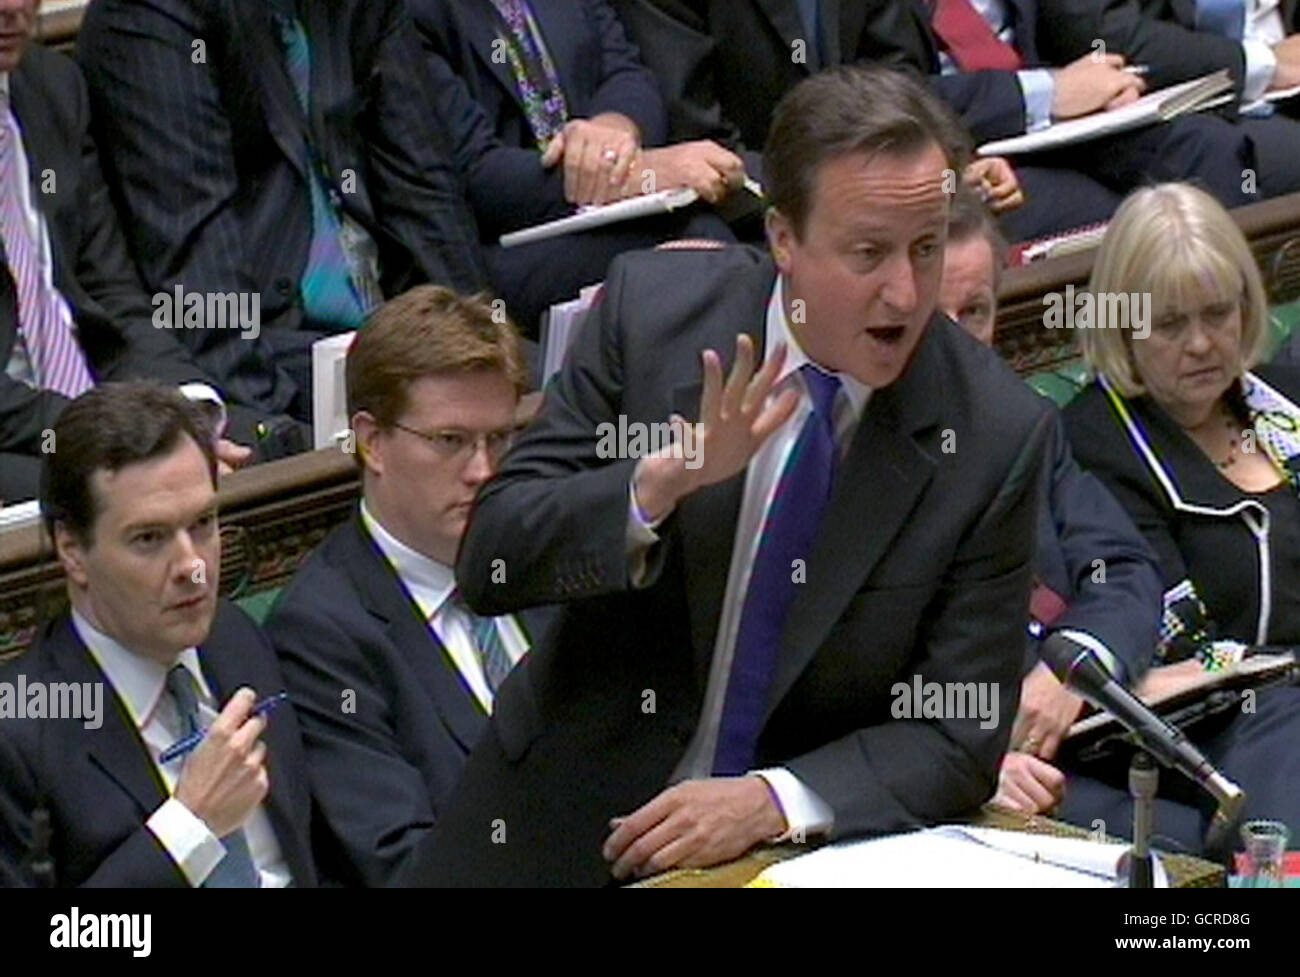 Prime Minister David Cameron speaks as Chancellor George Osborne (left) and Chief Secretary to the Treasury Danny Alexander (second left) look on during Prime Minister's Questions in the House of Commons, London. Stock Photo